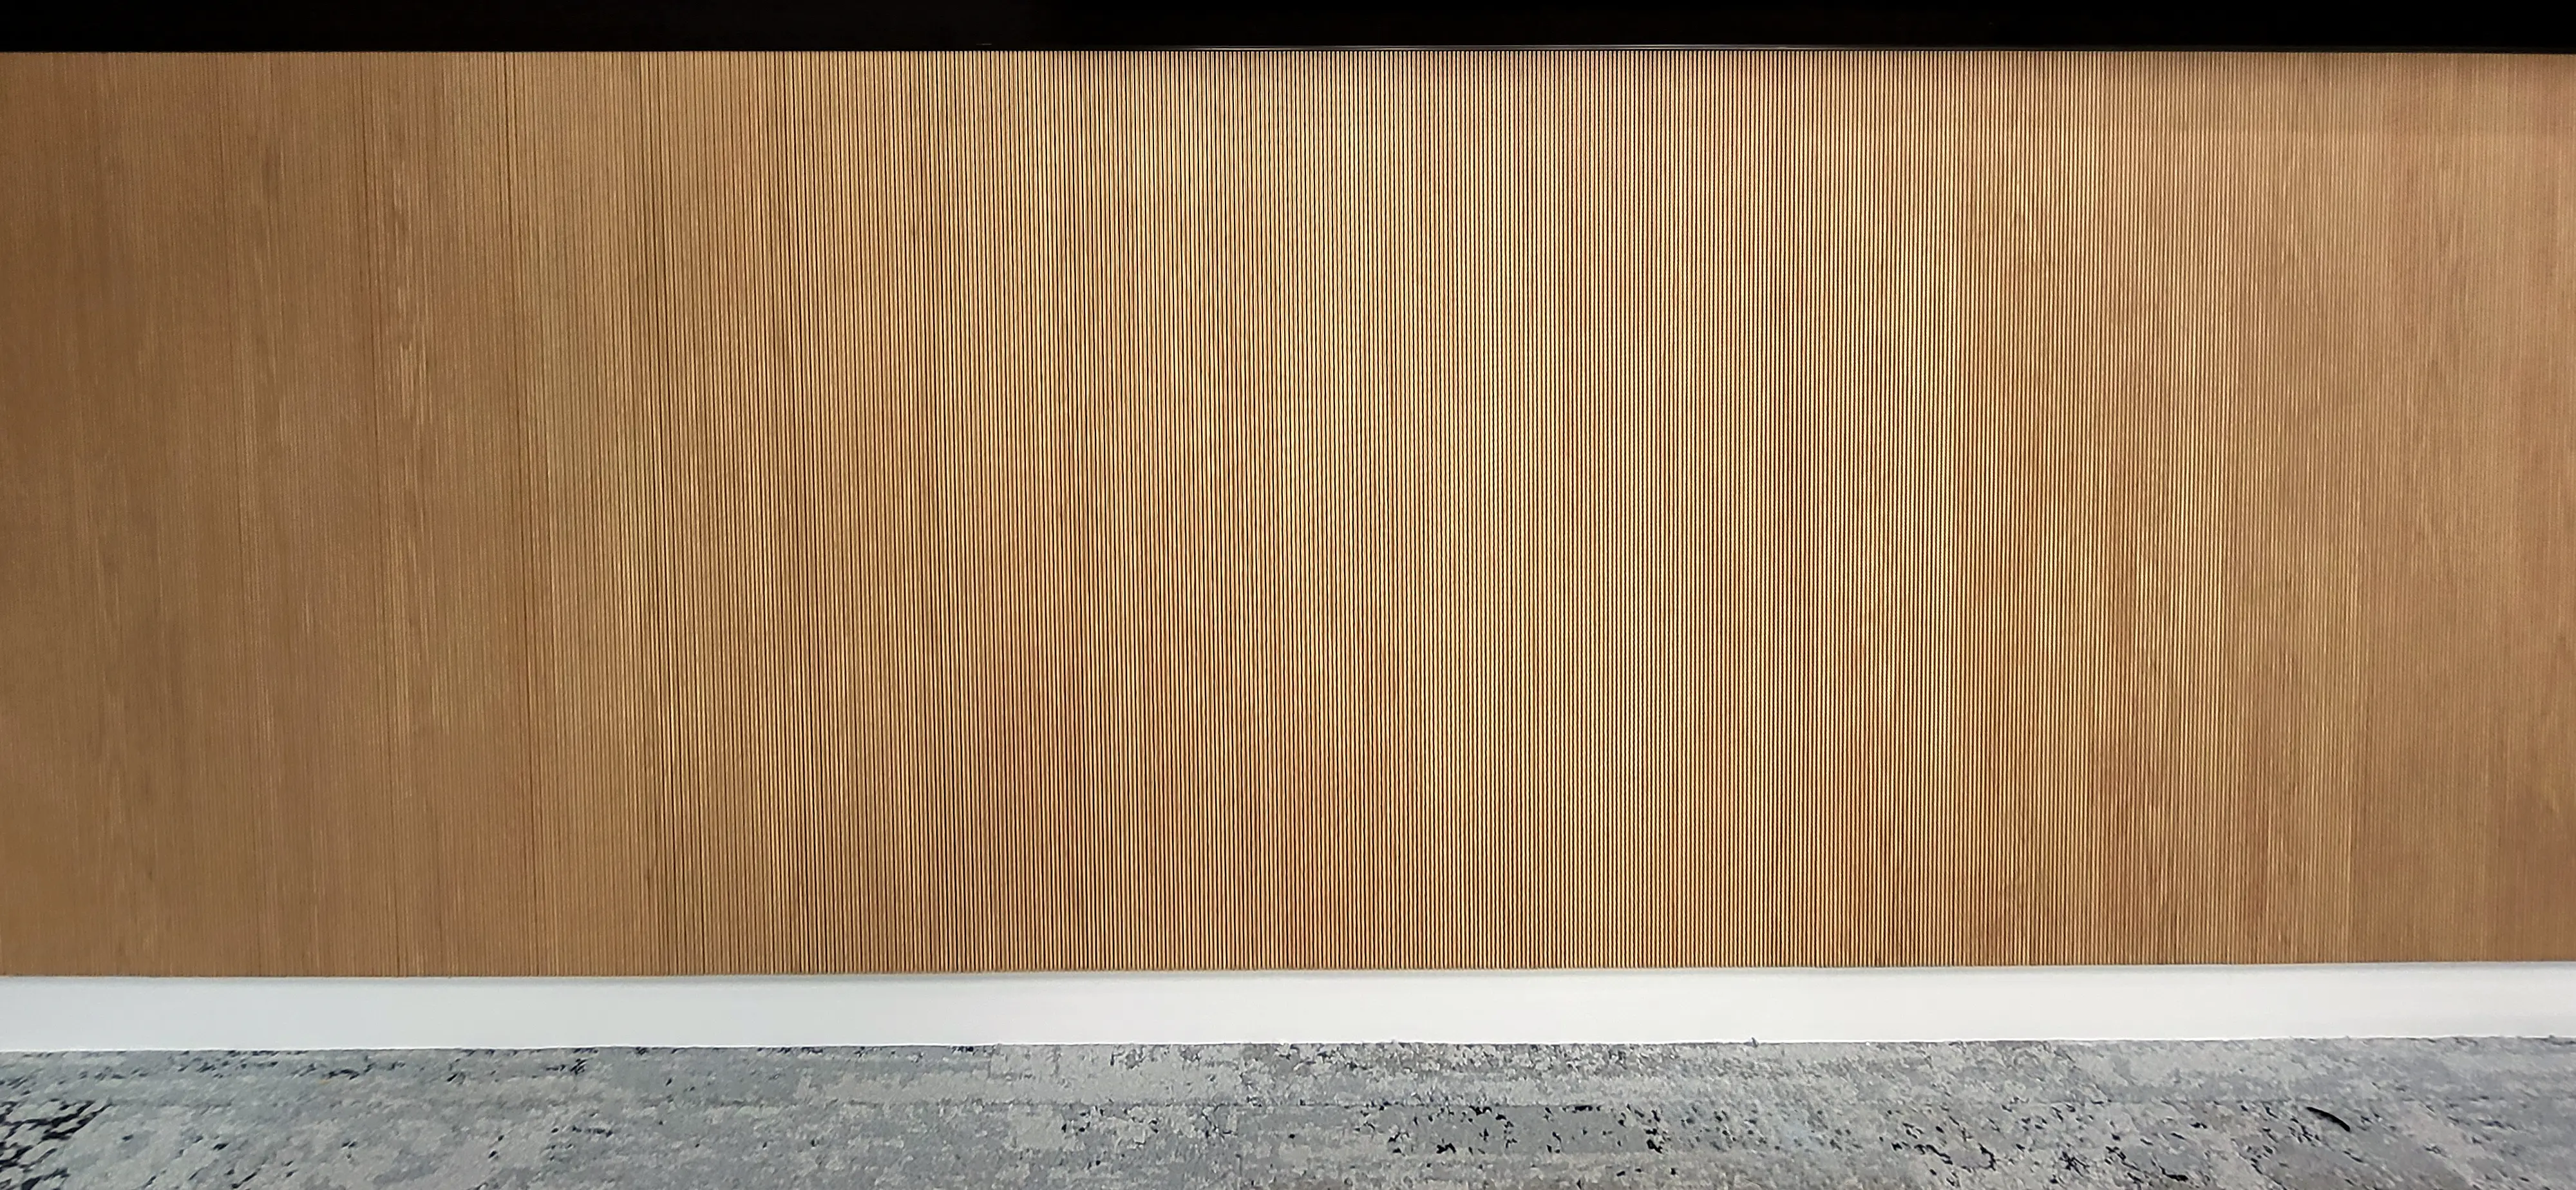 finishes slatted patern Wood Grain—Acoustic Wood Panels for Tirlan